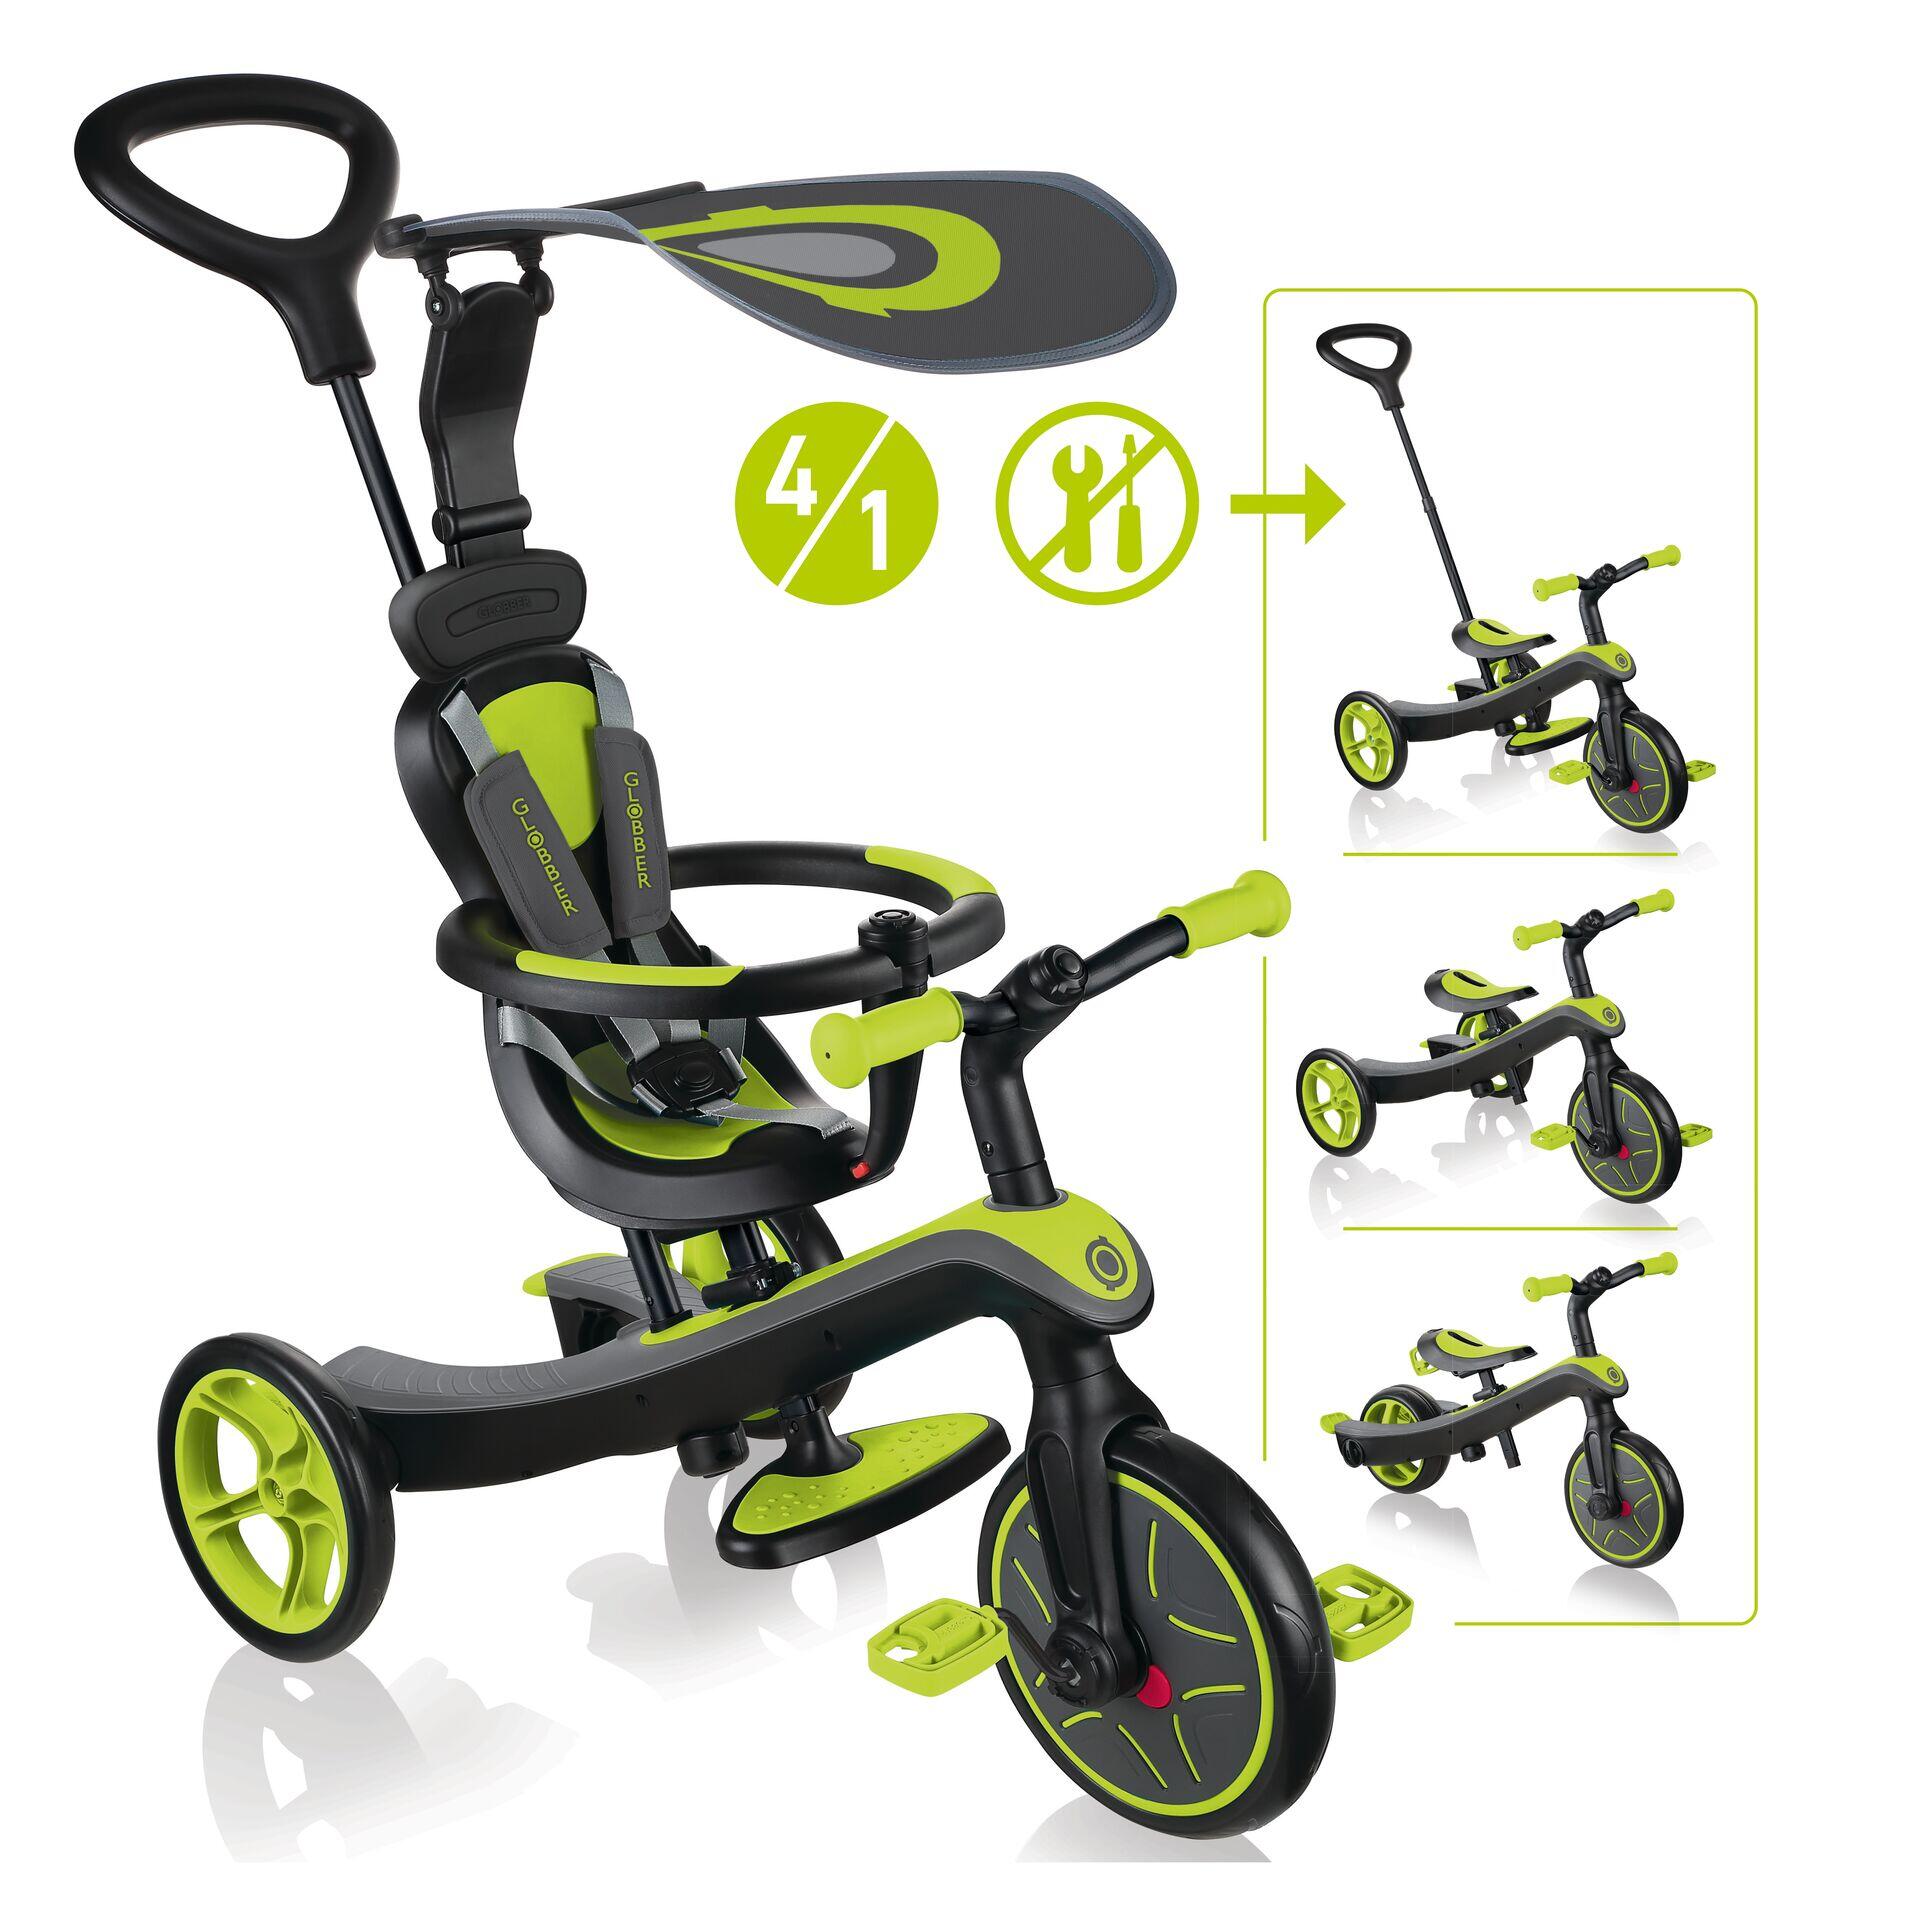 GLOBBER Globber Explorer Trike 4 in 1 with Parent Handle - Lime Green